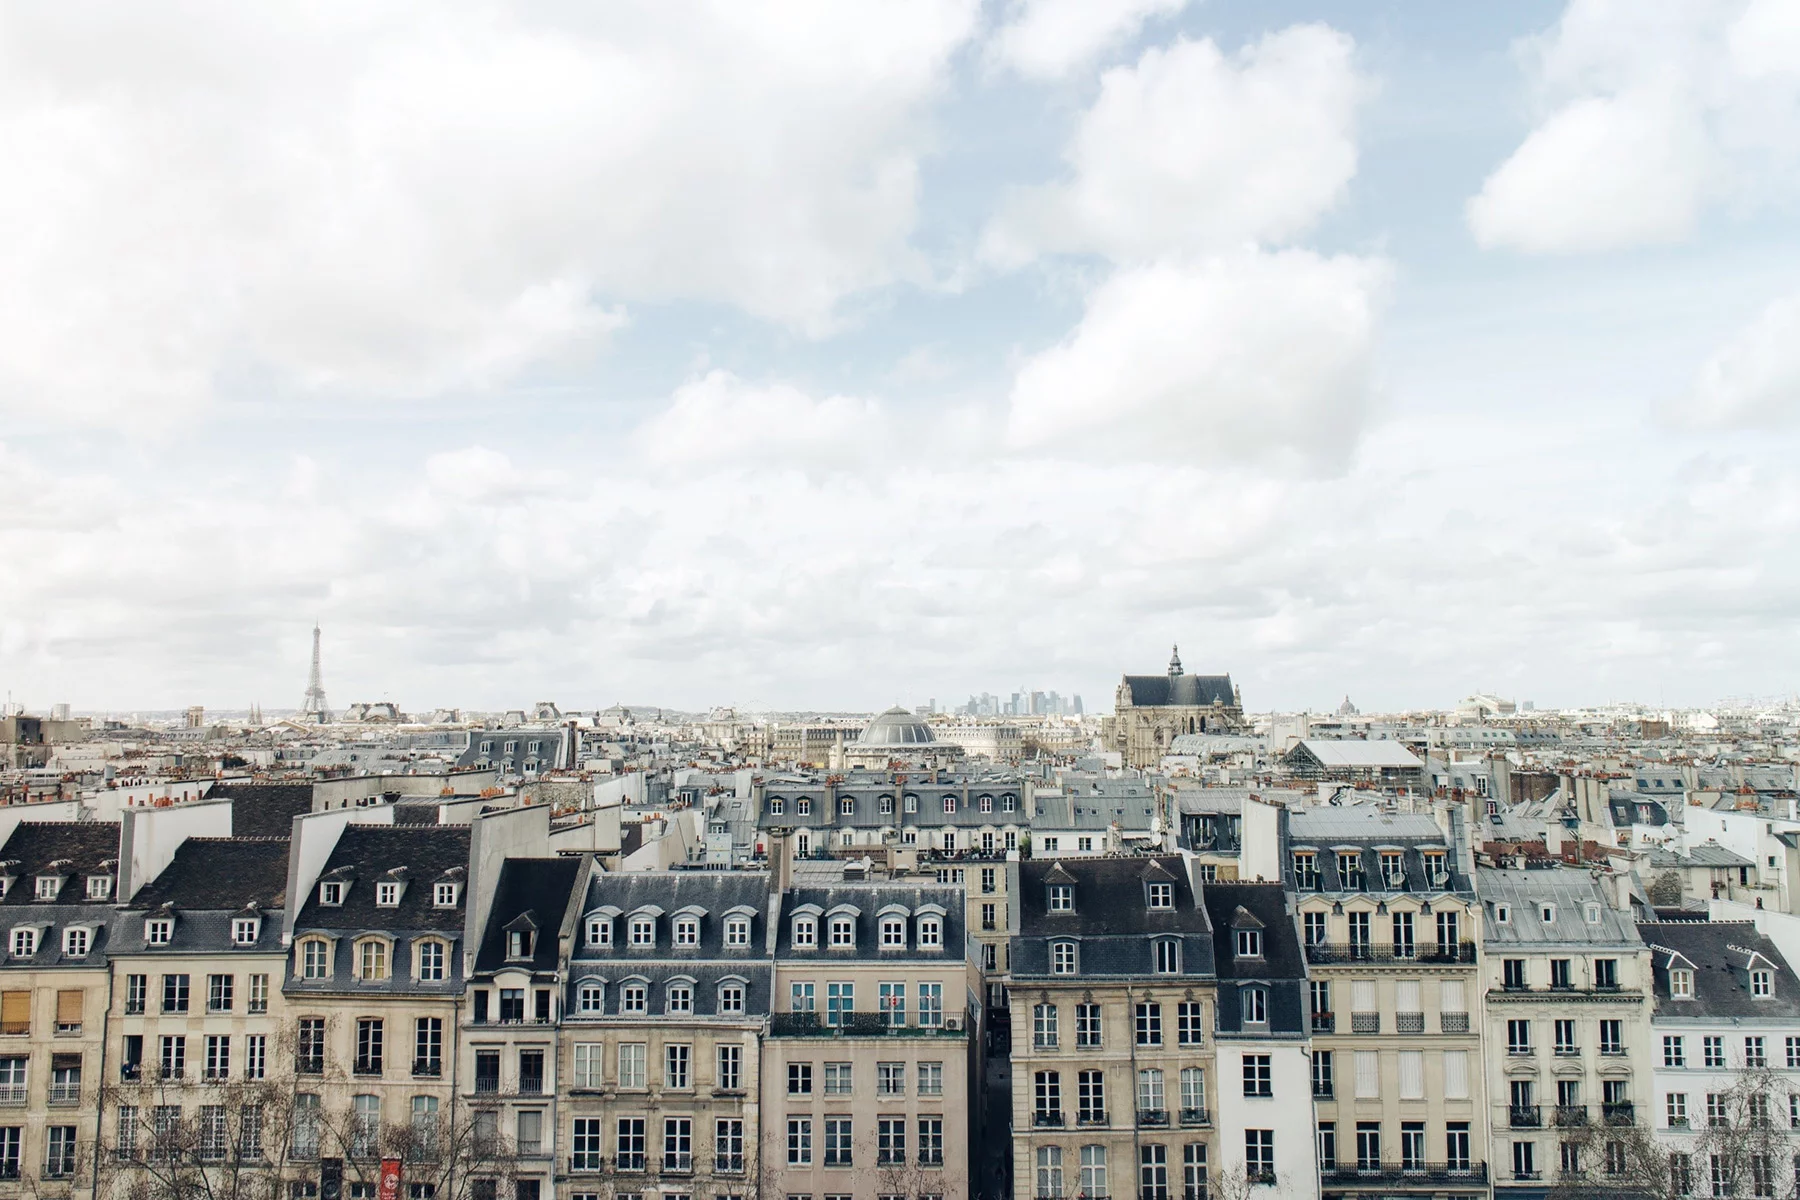 Bird's eye view of typical Parisian Haussmann roofs, with the Eiffel Tower in the background. Photo by Nil Castellvi